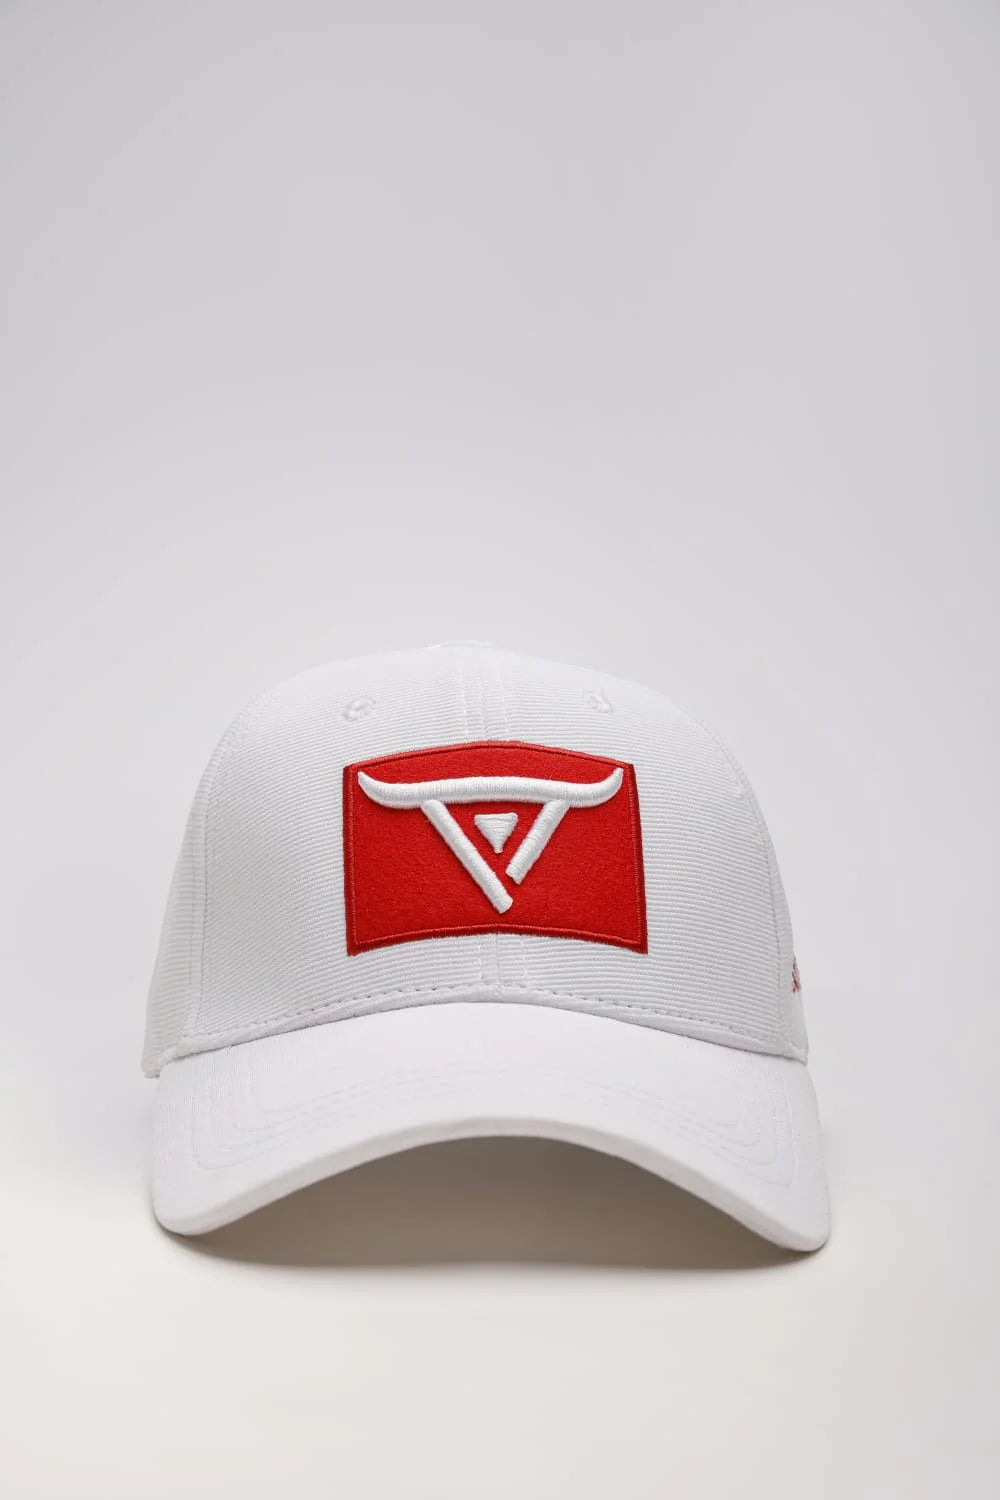 Unisex White& Red solid baseball cap, has a visor by One Player